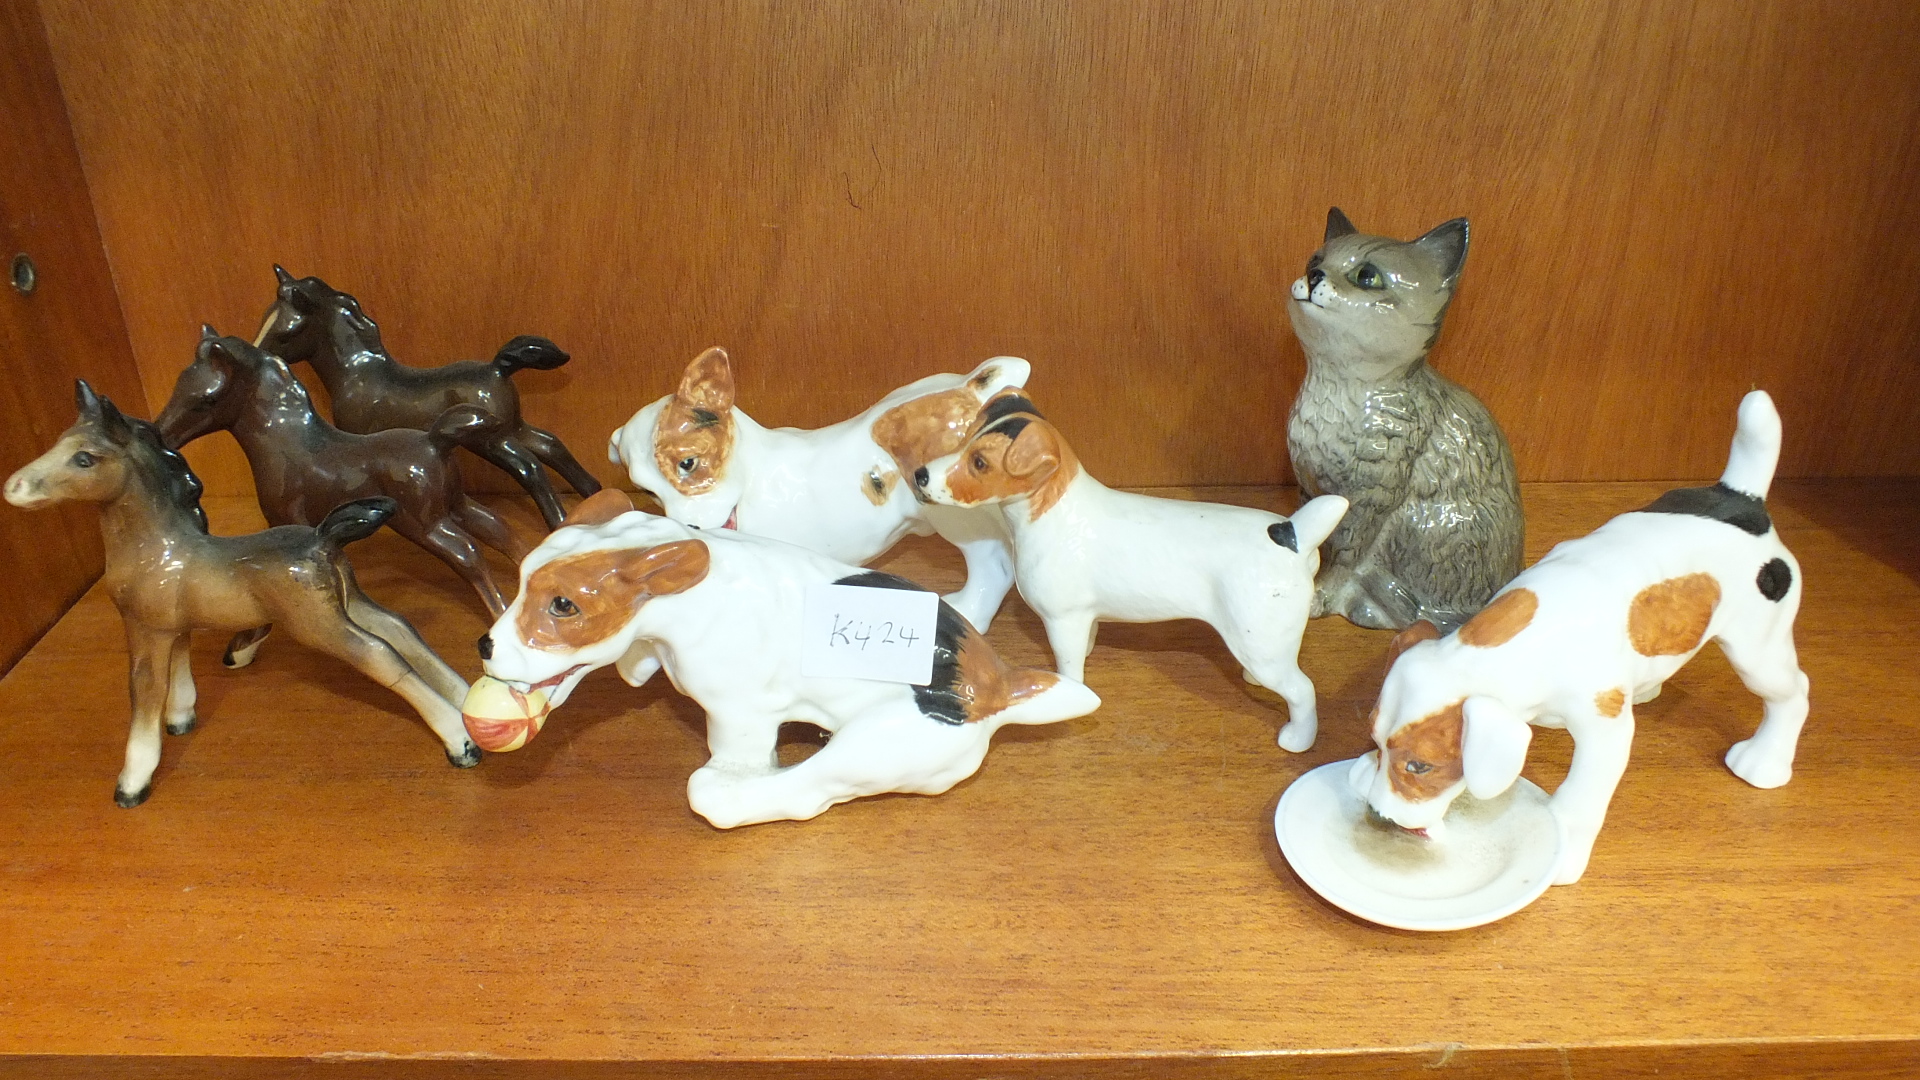 A Royal Doulton model of a dog licking a plate, two other Royal Doulton dog models and five